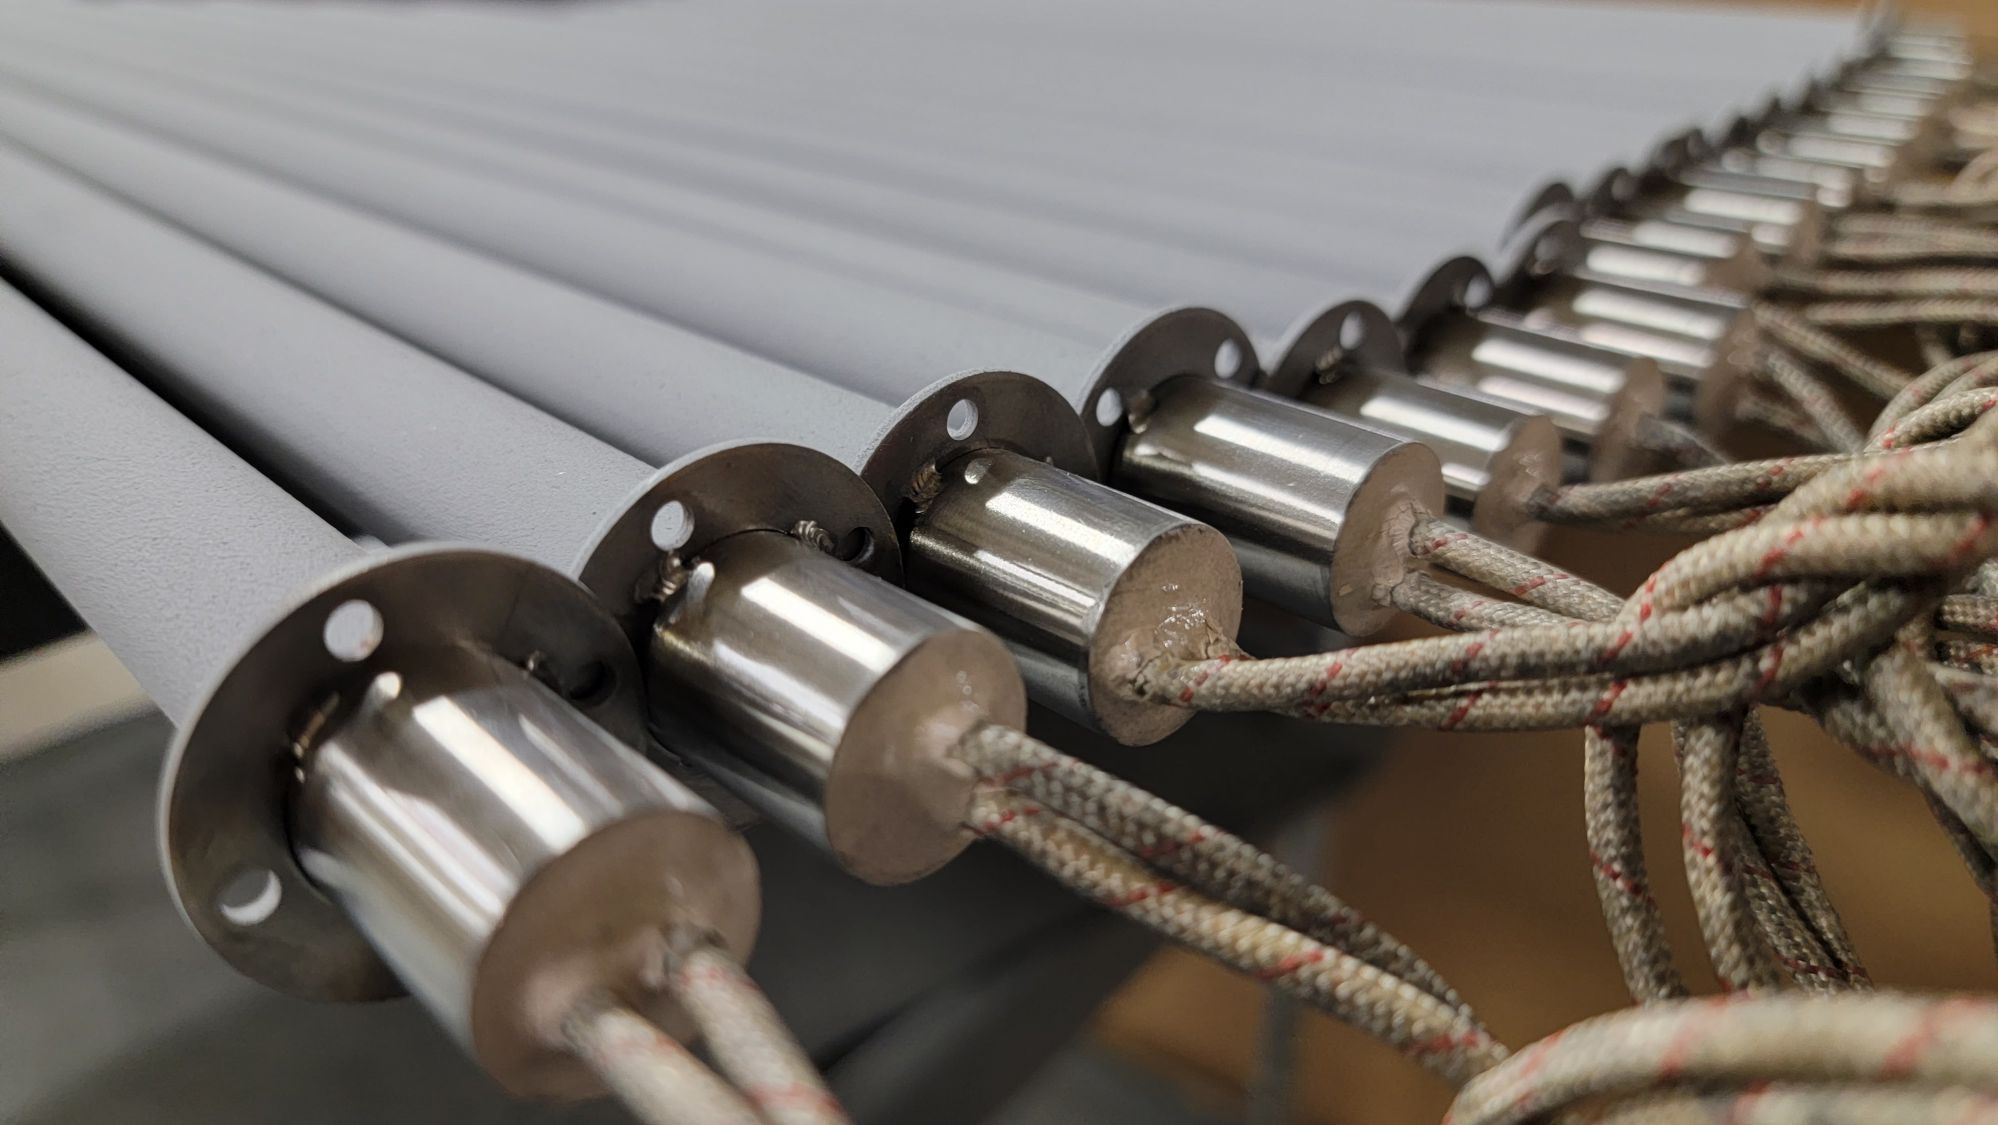 The Differences Between Tubular Heaters and Cartridge Heaters